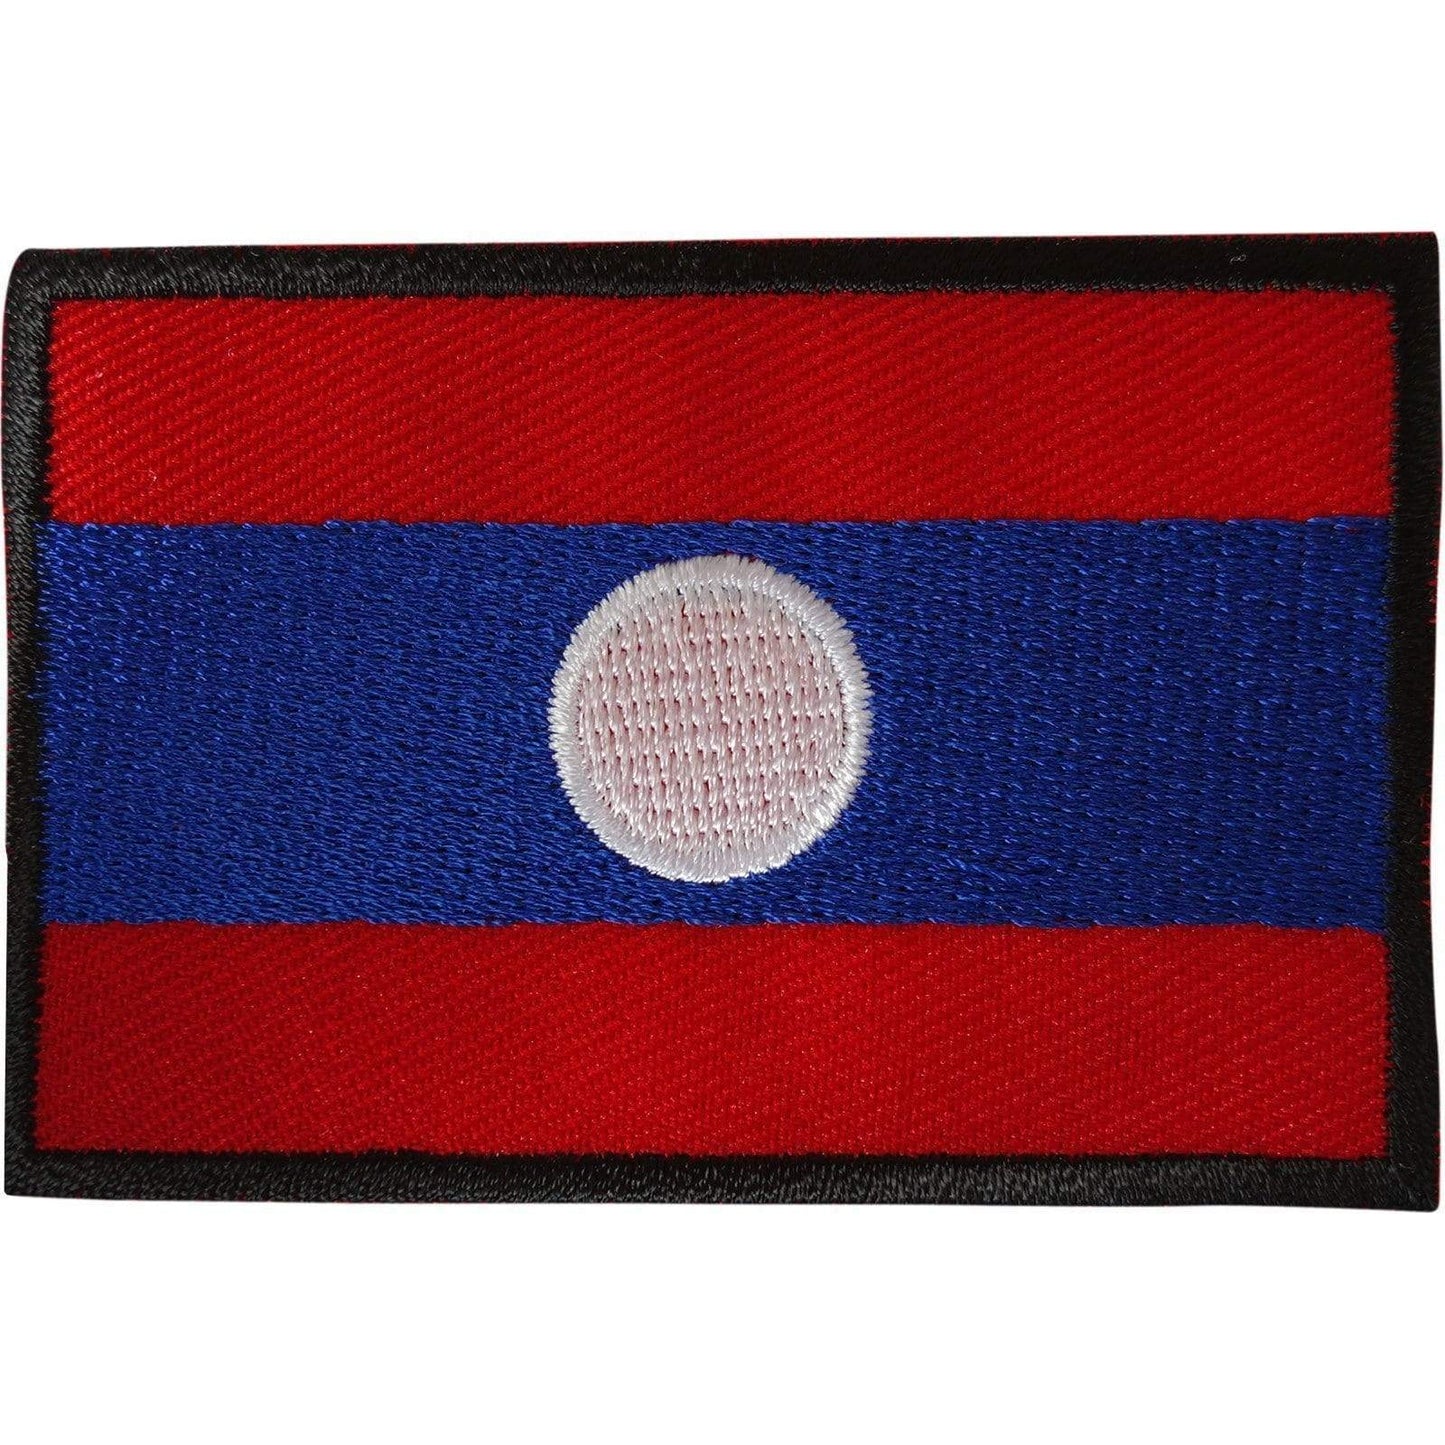 Laos Flag Patch Iron On Sew On Clothes Lao Embroidery Badge Embroidered Applique